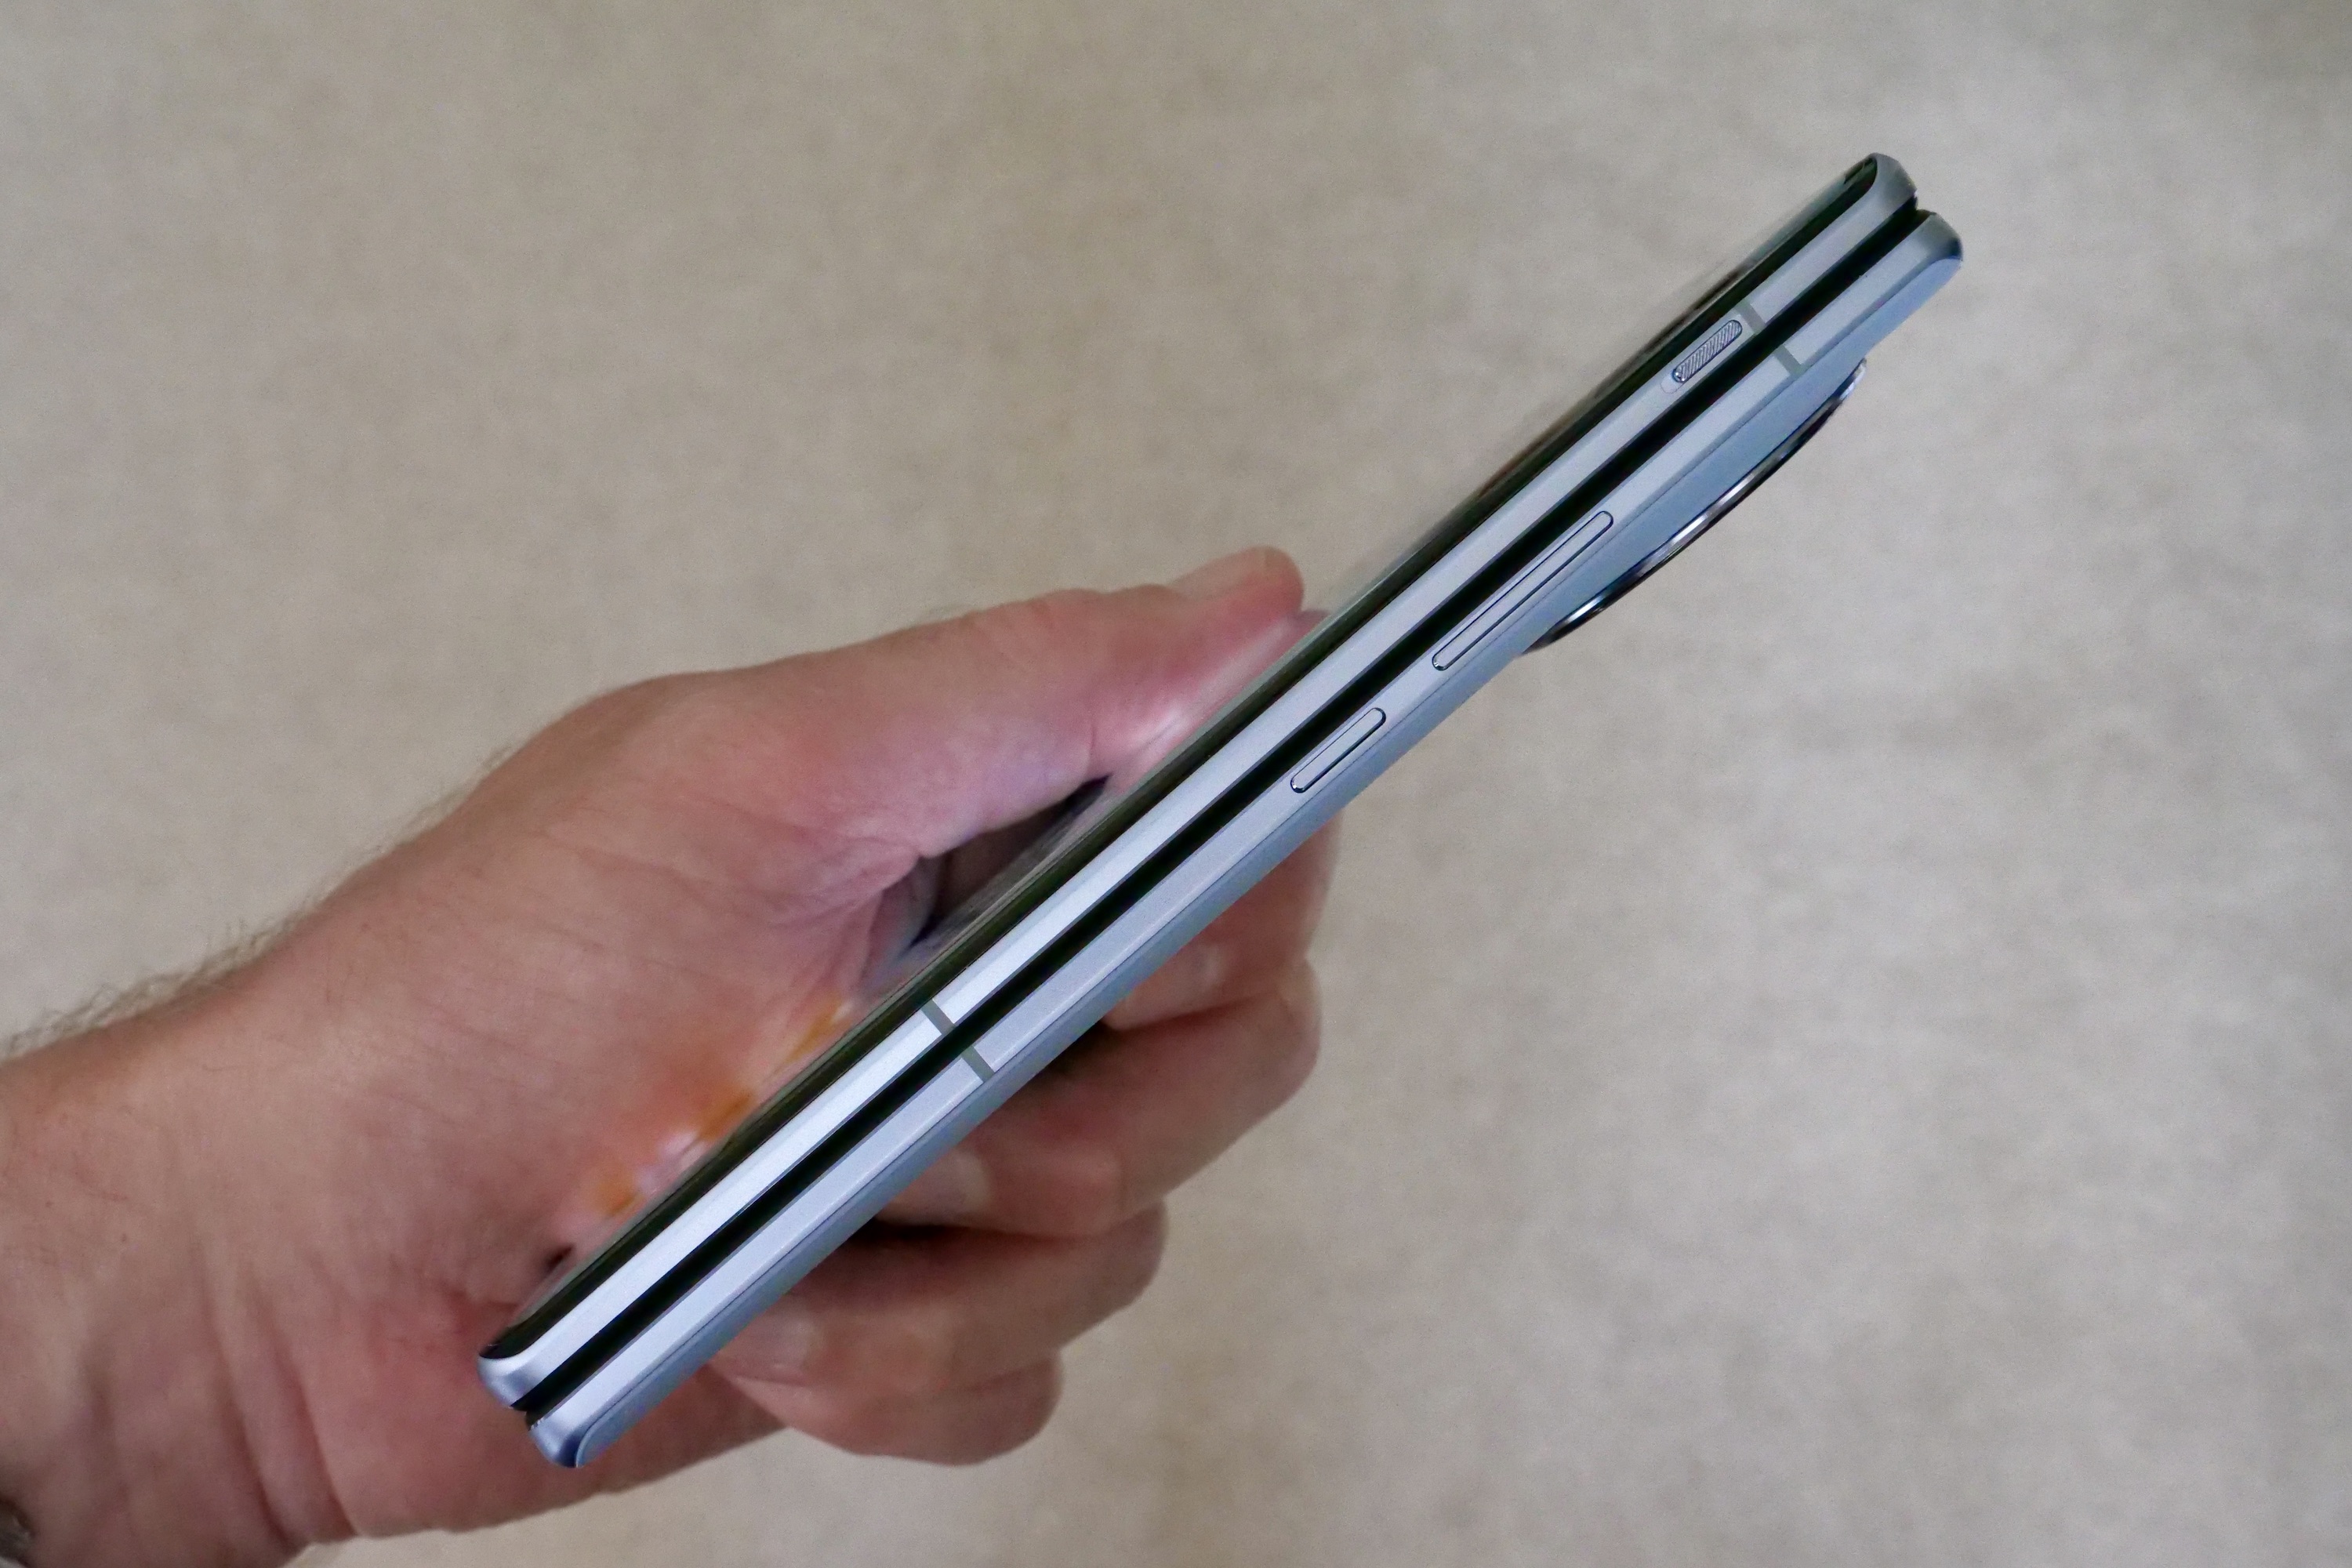 A person holding the Vivo X Fold 2 and showing the side of the device.